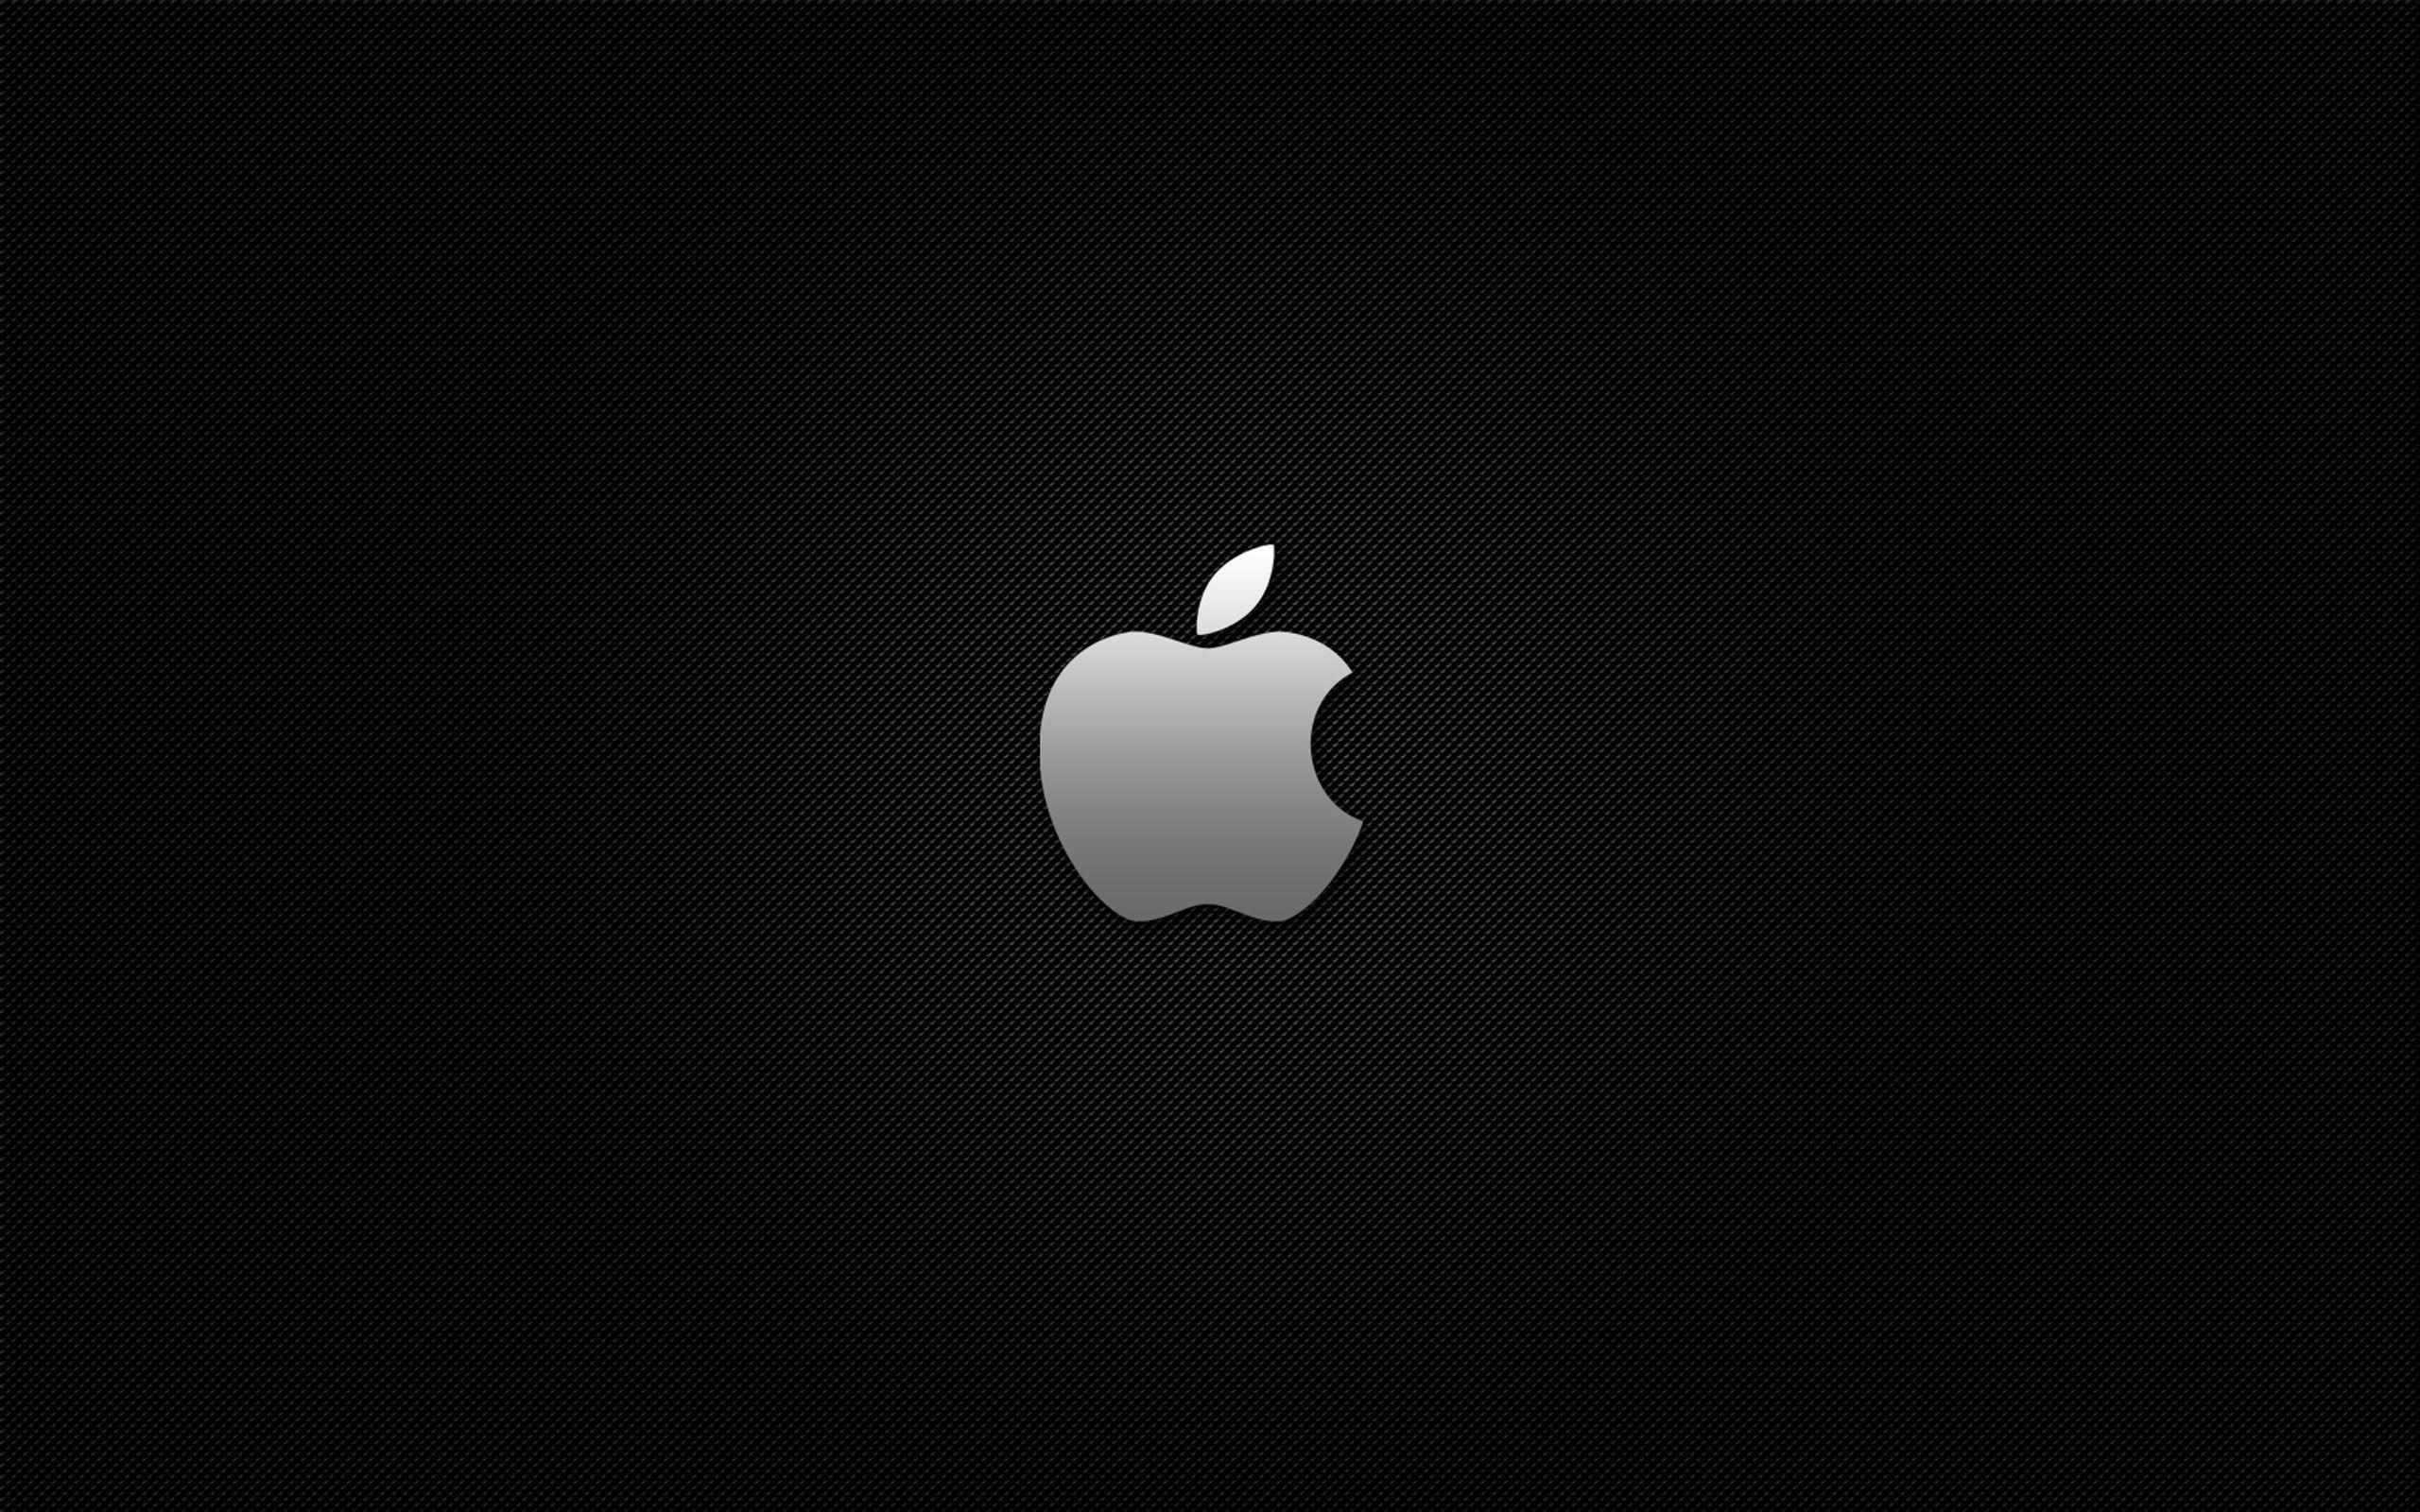 Apple Simple Logo on Black Background Wallpaper and